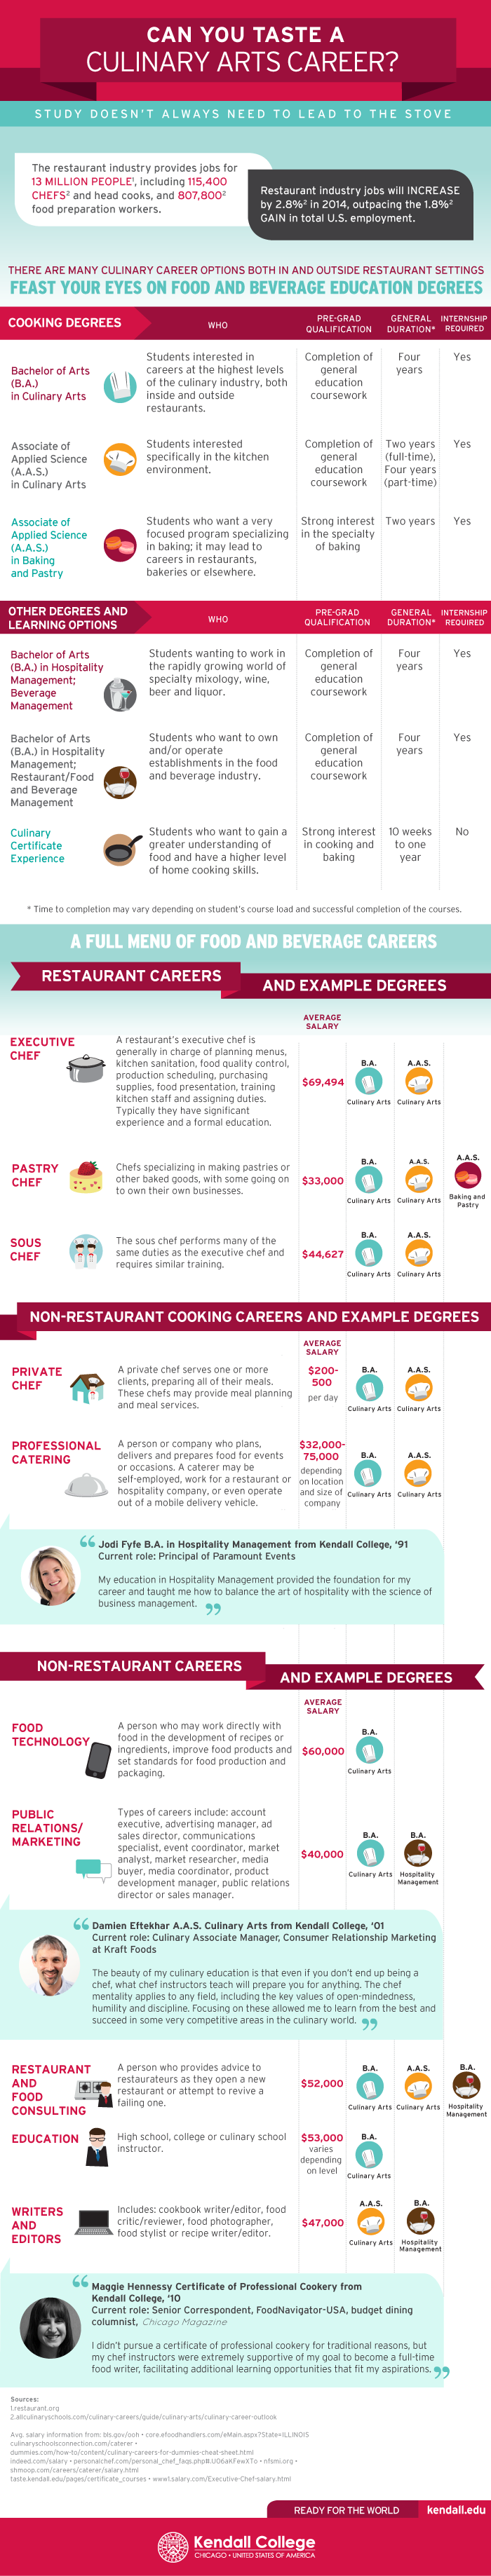 Kendall-culinary-arts-career-infographic.fw_